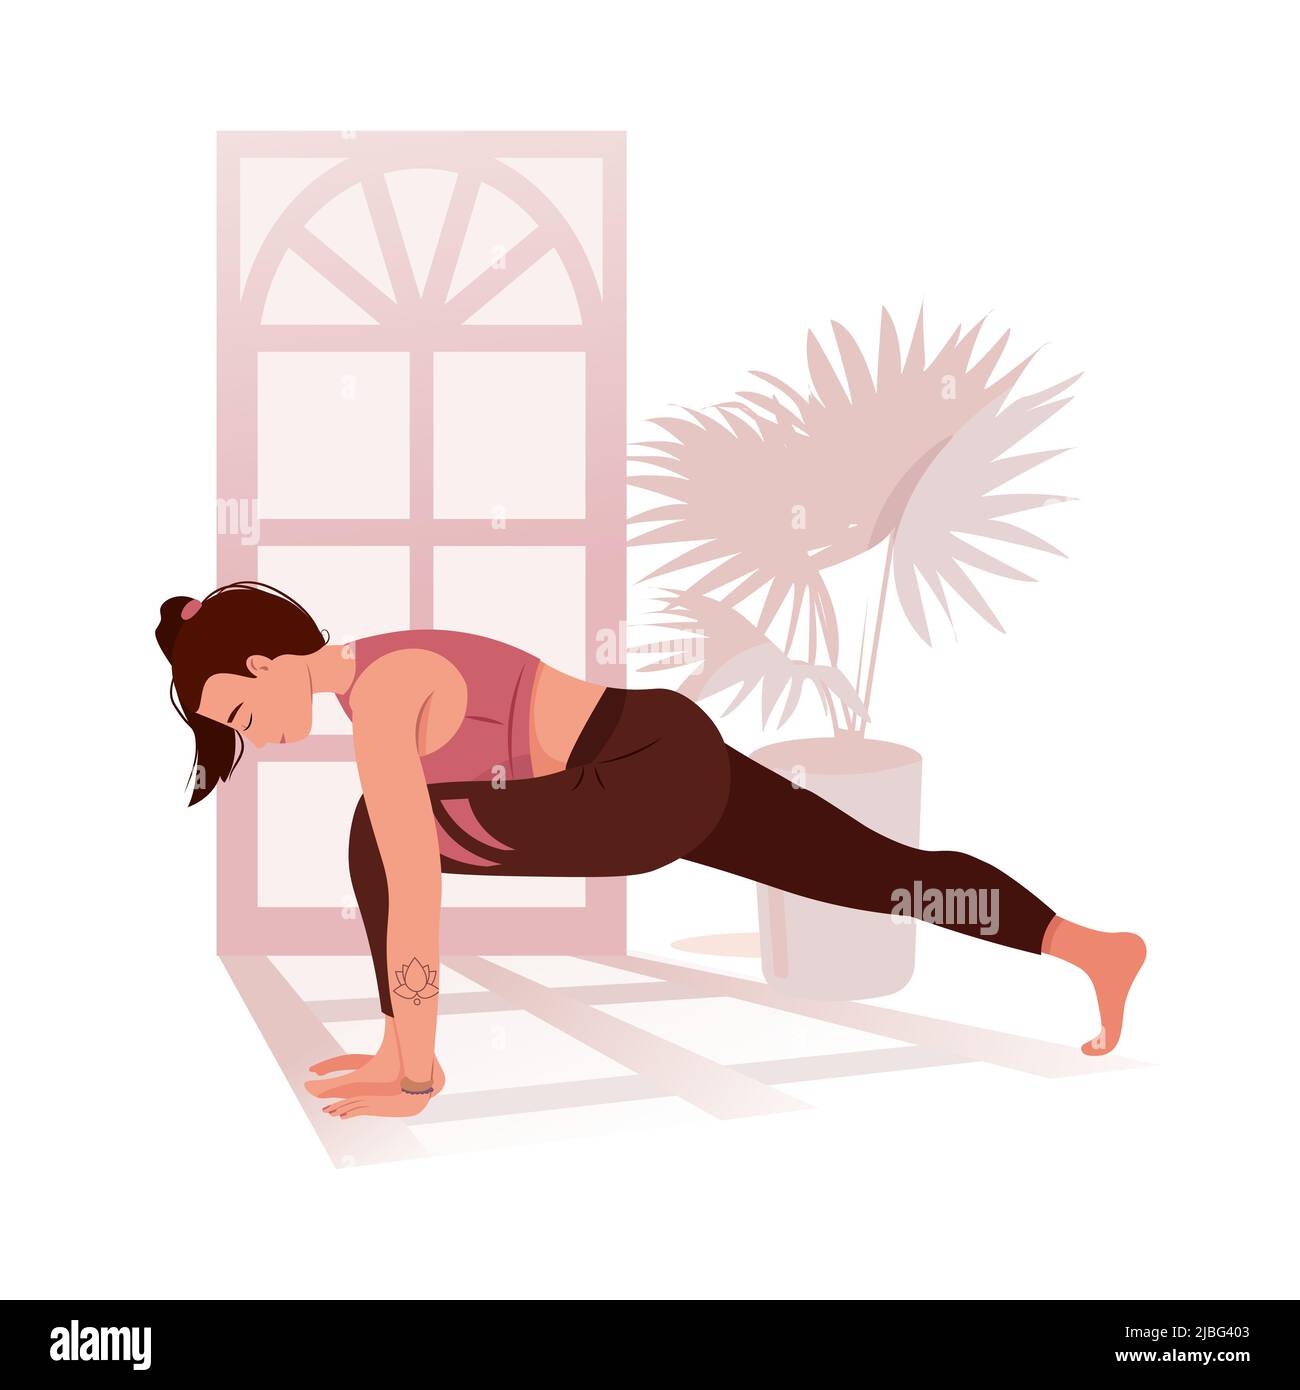 Woman practicing yoga, different poses. Healthy lifestyle. Woman with closed eyes, stretching her legs and meditating. Meditation practice. Zen and harmony concept. Vector illustration in flat style. Stock Vector